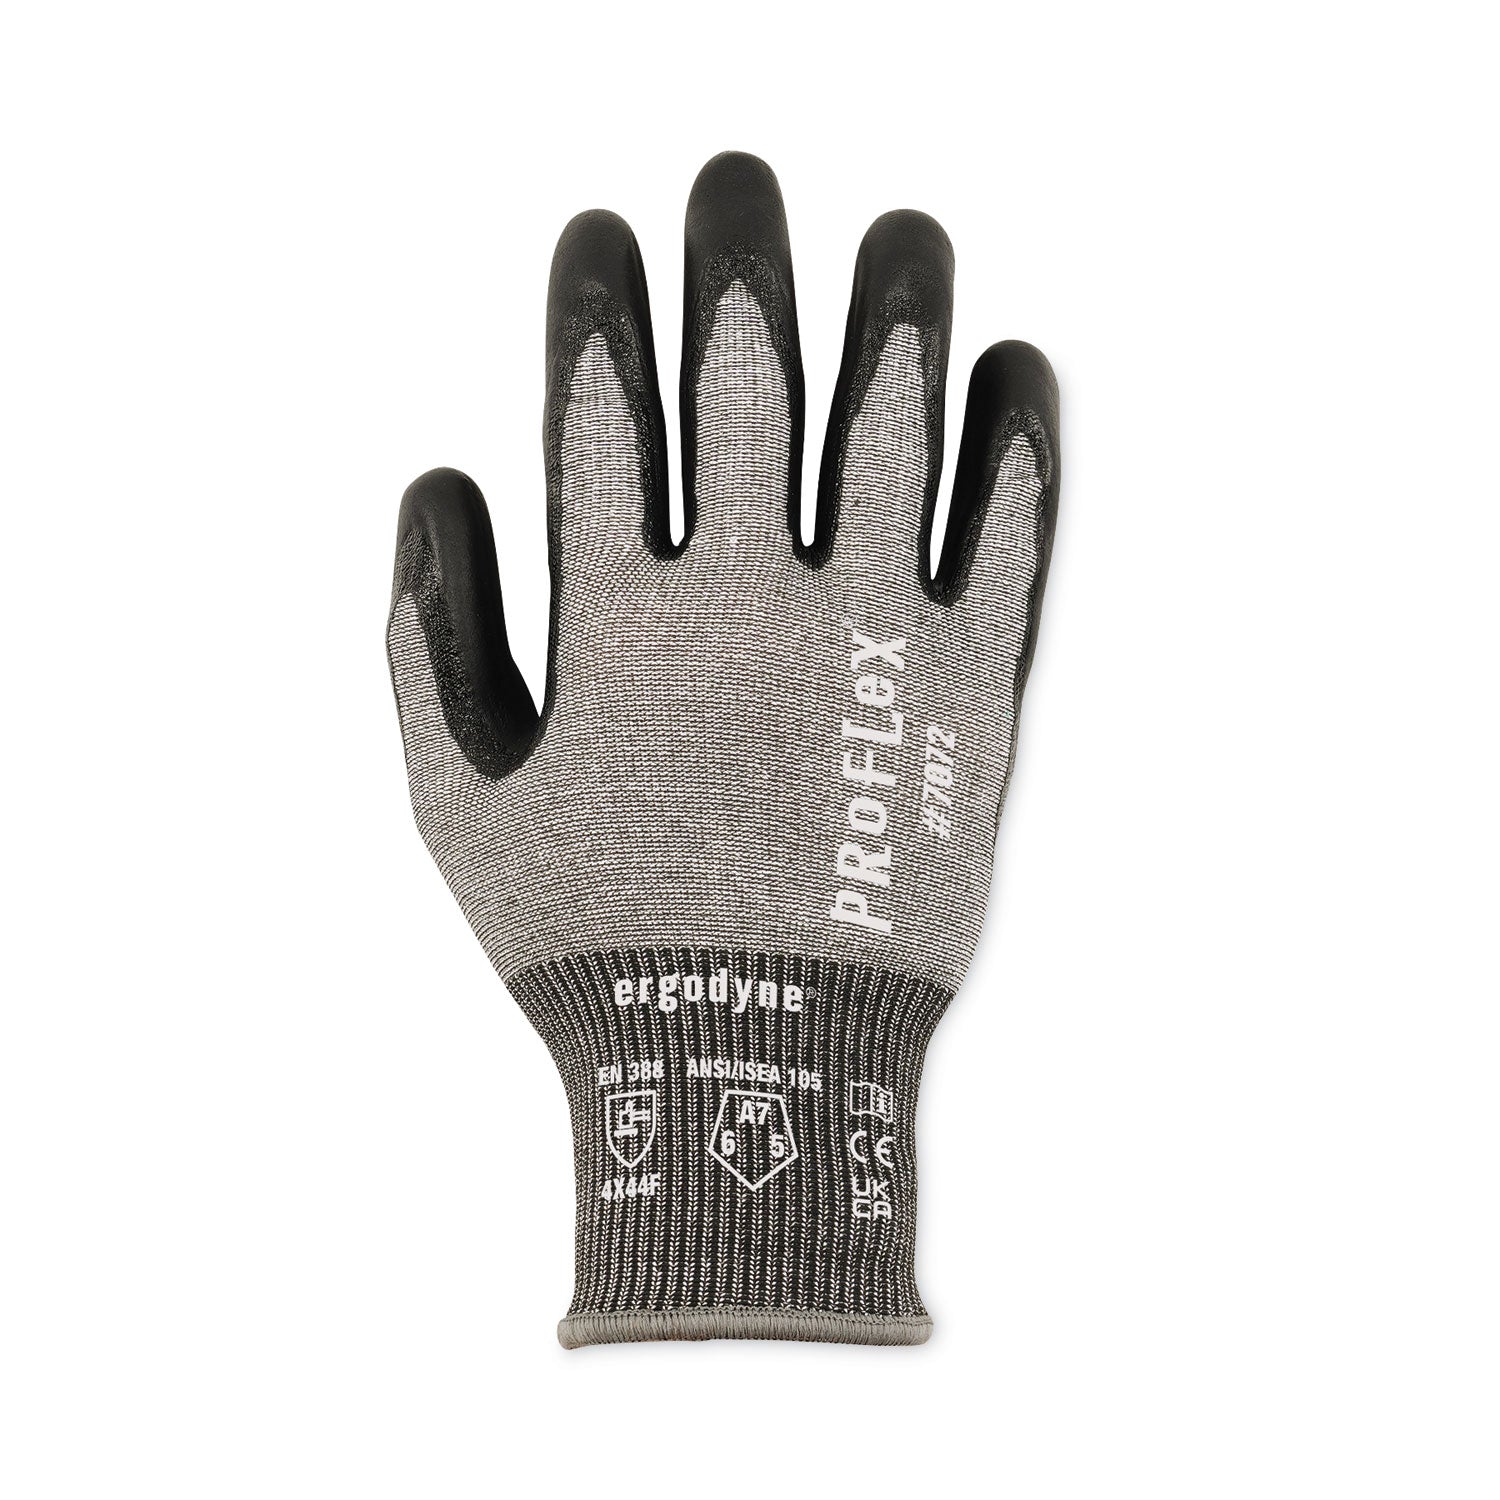 proflex-7072-ansi-a7-nitrile-coated-cr-gloves-gray-x-large-pair-ships-in-1-3-business-days_ego10315 - 2